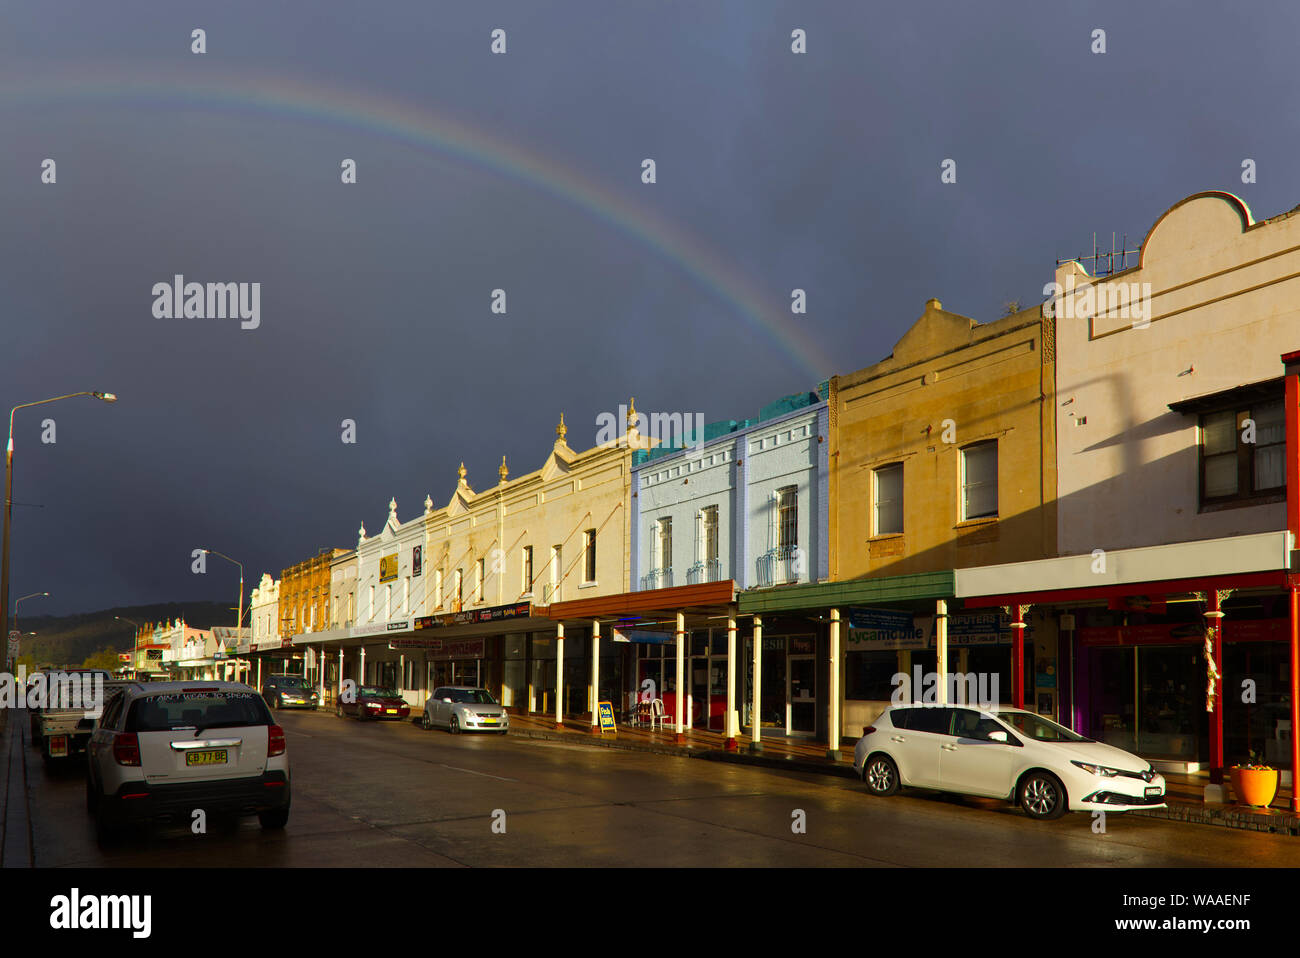 Rainbow over shops  Lithgow New South Wales Australia Stock Photo